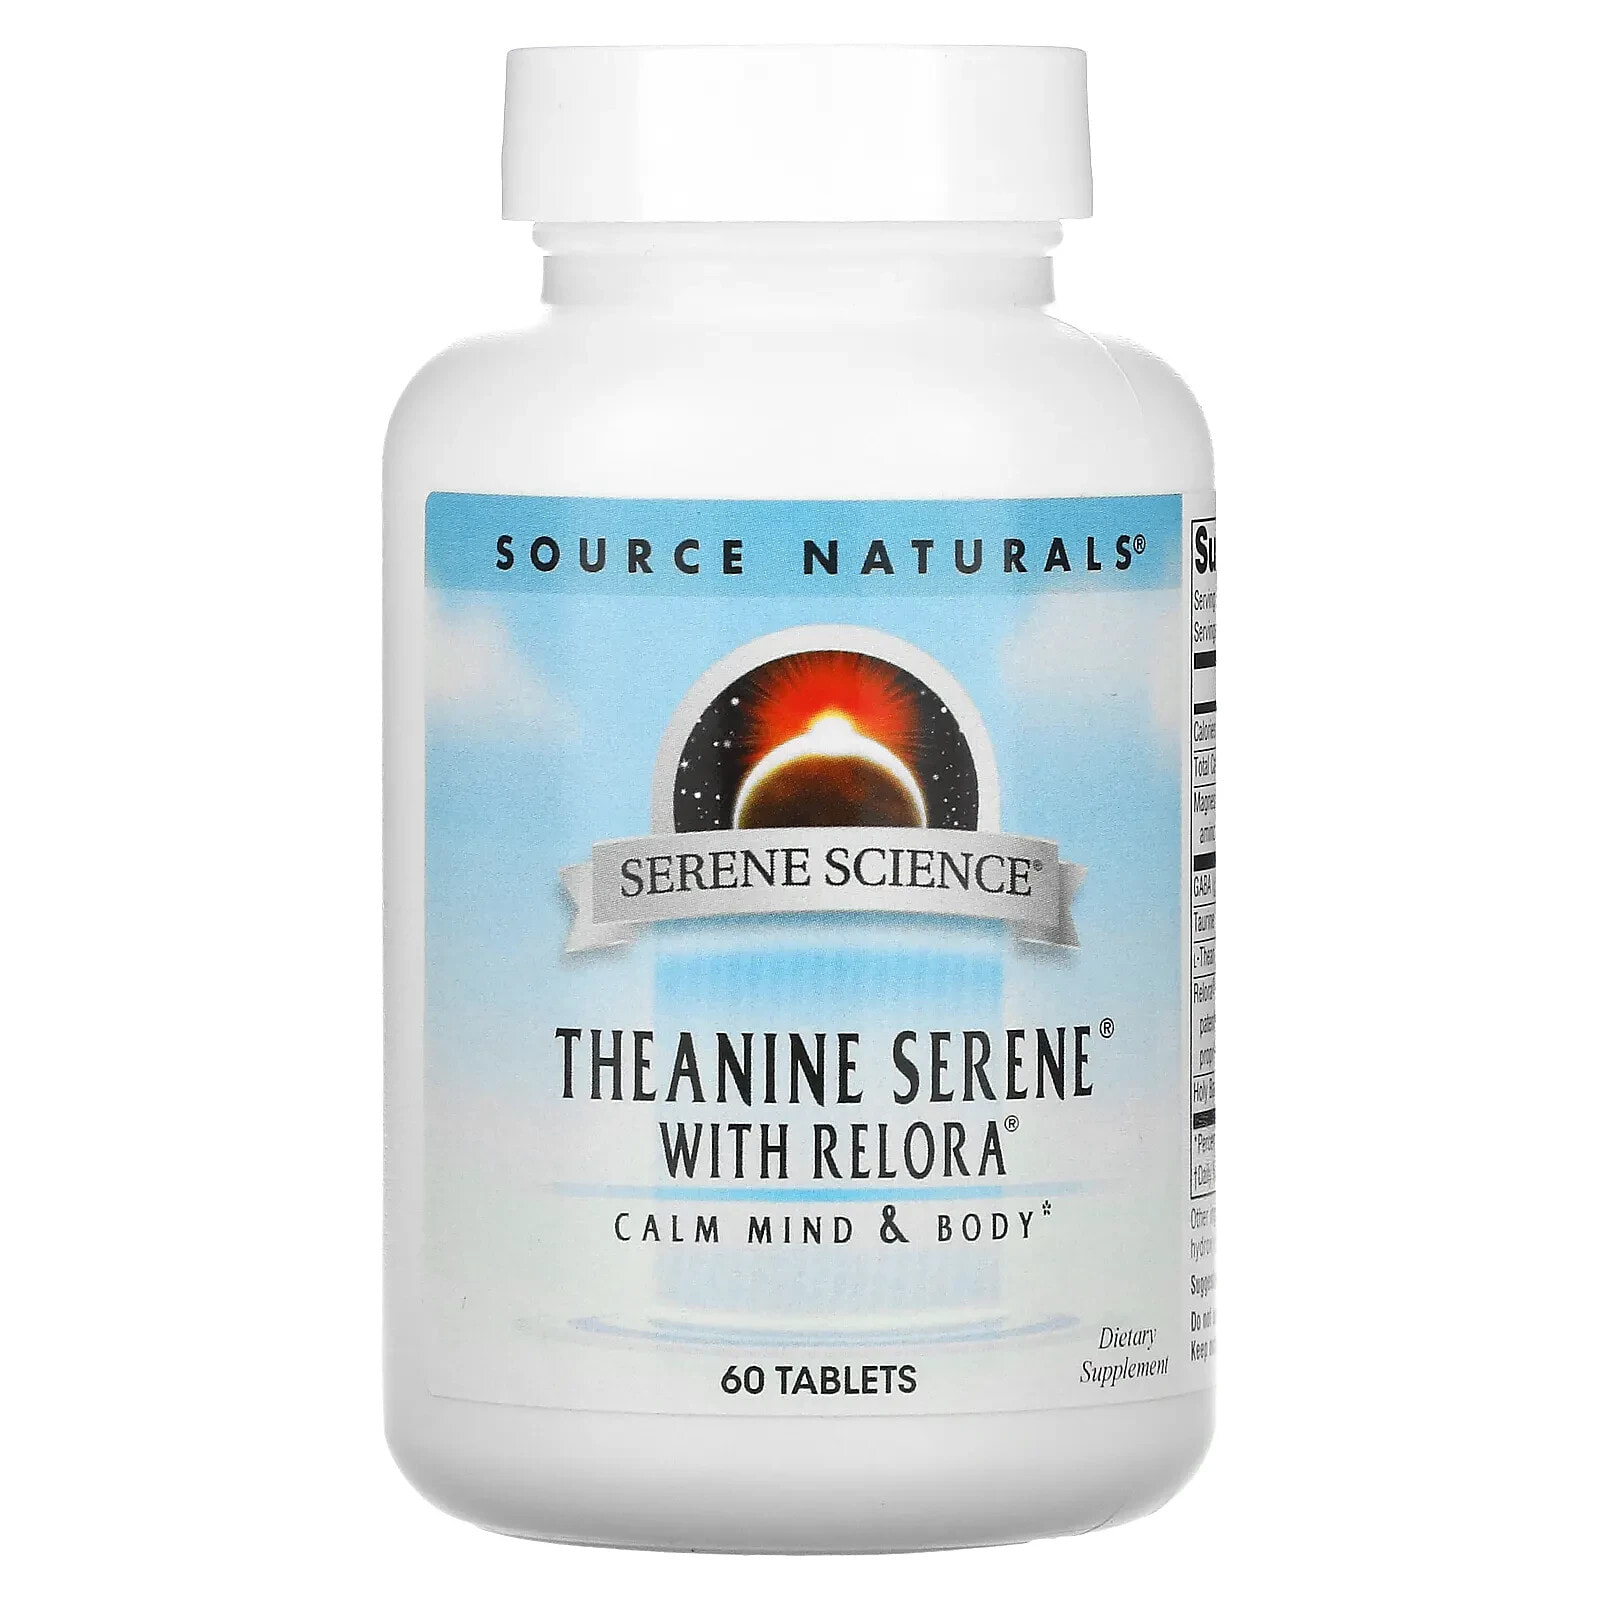 Source Naturals, Serene Science, Theanine Serene with Relora, 60 Tablets